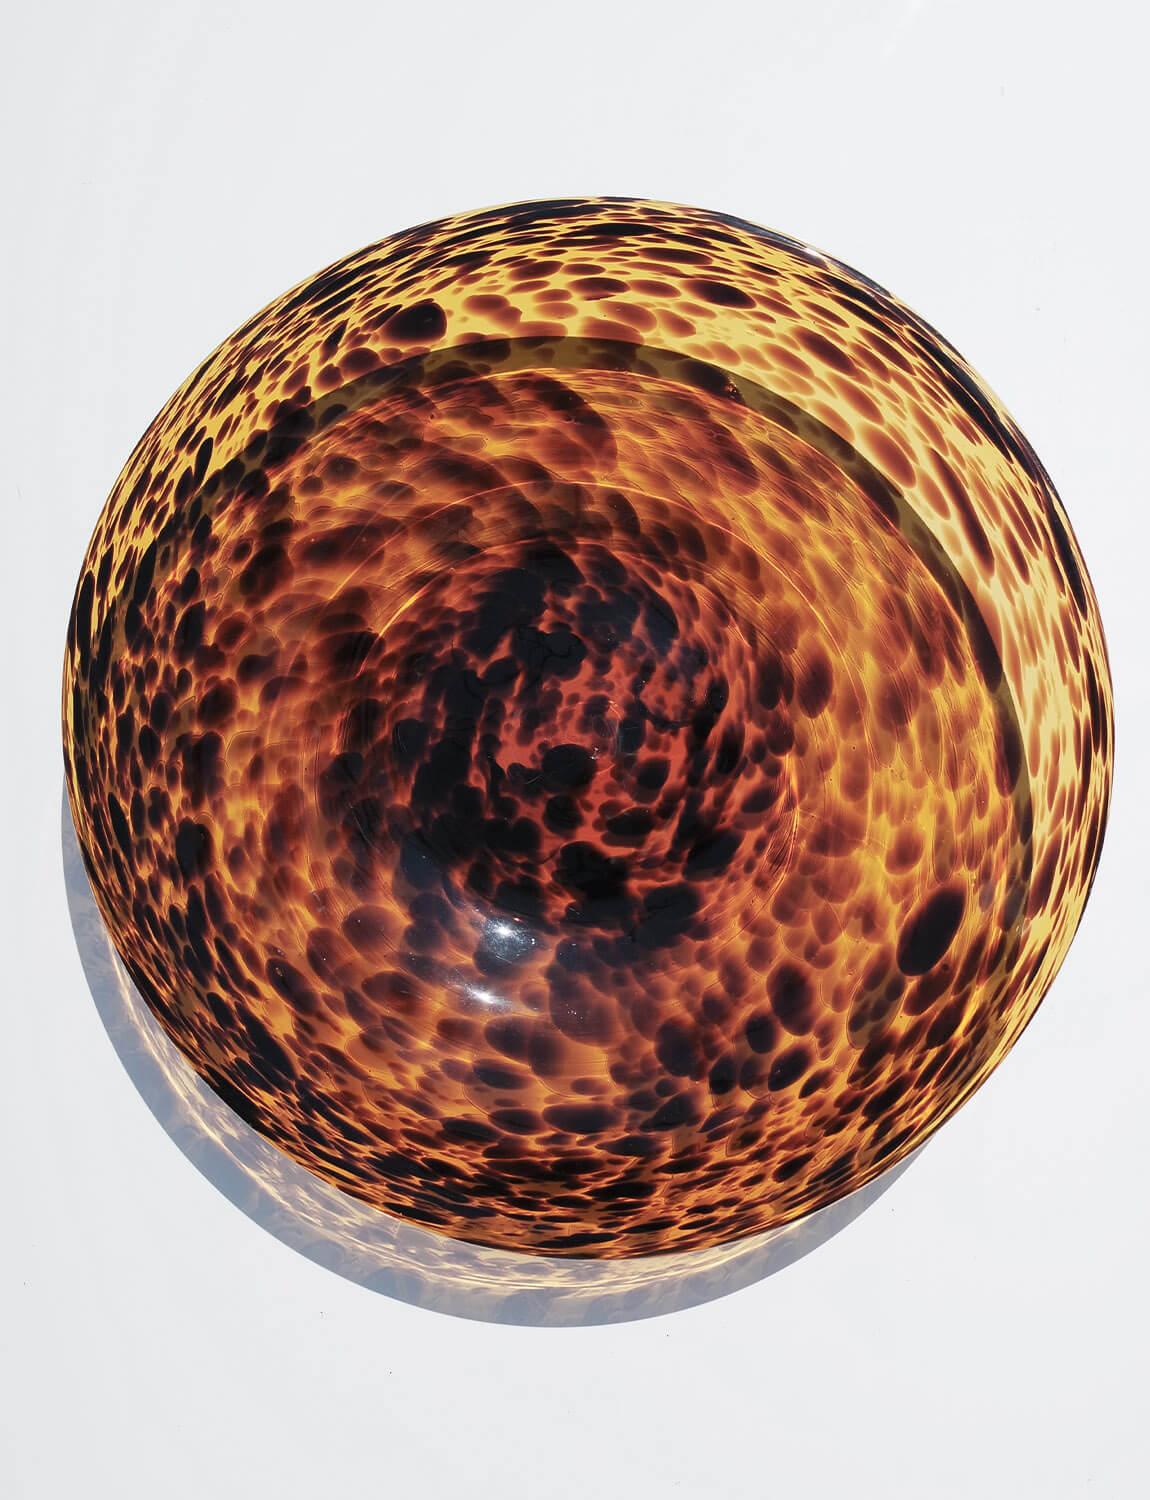 This incredible hand blown Tortoiseshell plate / centre piece was made in Empoli in the 1960s. Empoli, the historic town near Florence, has a long heritage of glass blowing dating back to the 13th century but came into fashion in the 1920s through